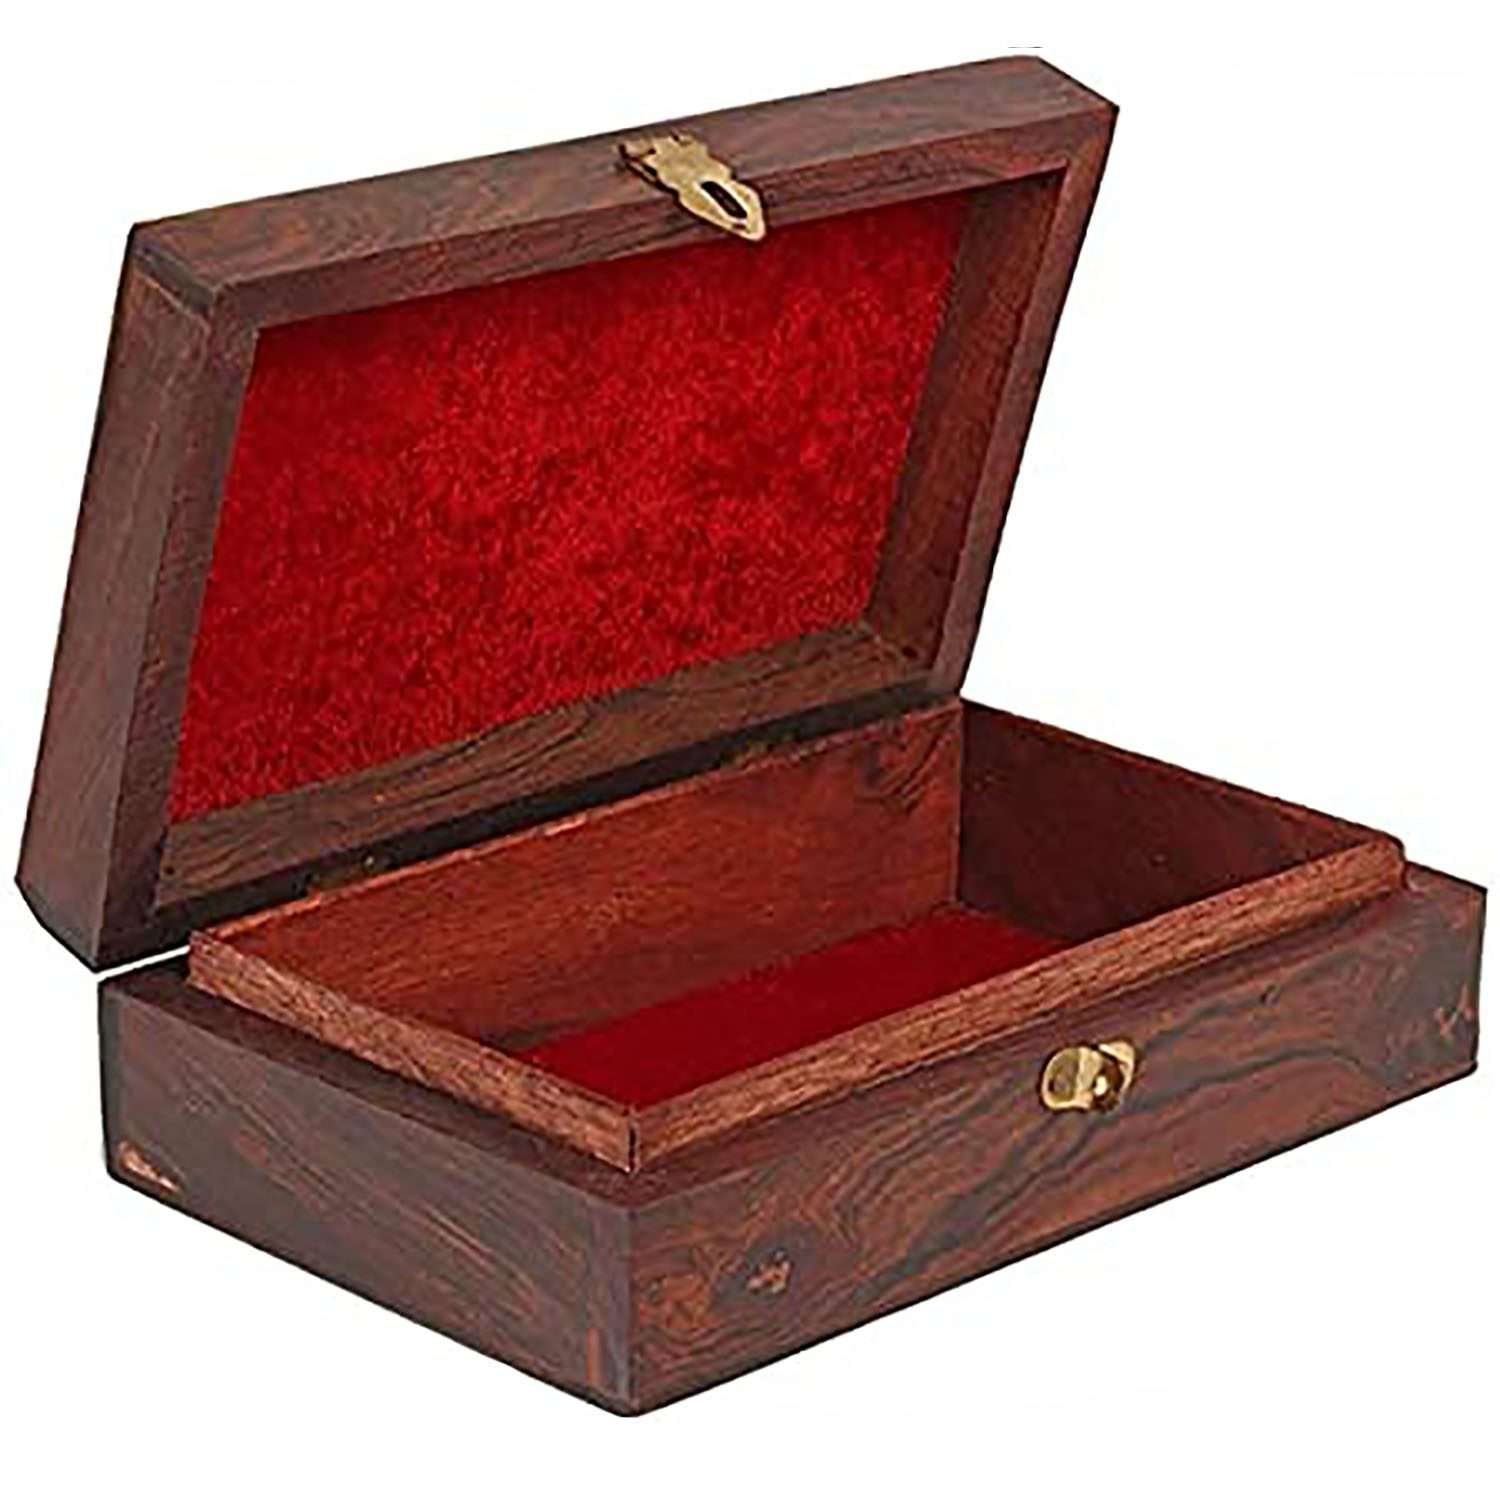 Handmade Sheesham Wooden Jewellery Box for Women | Hand Carved with Intricate Carvings Items |